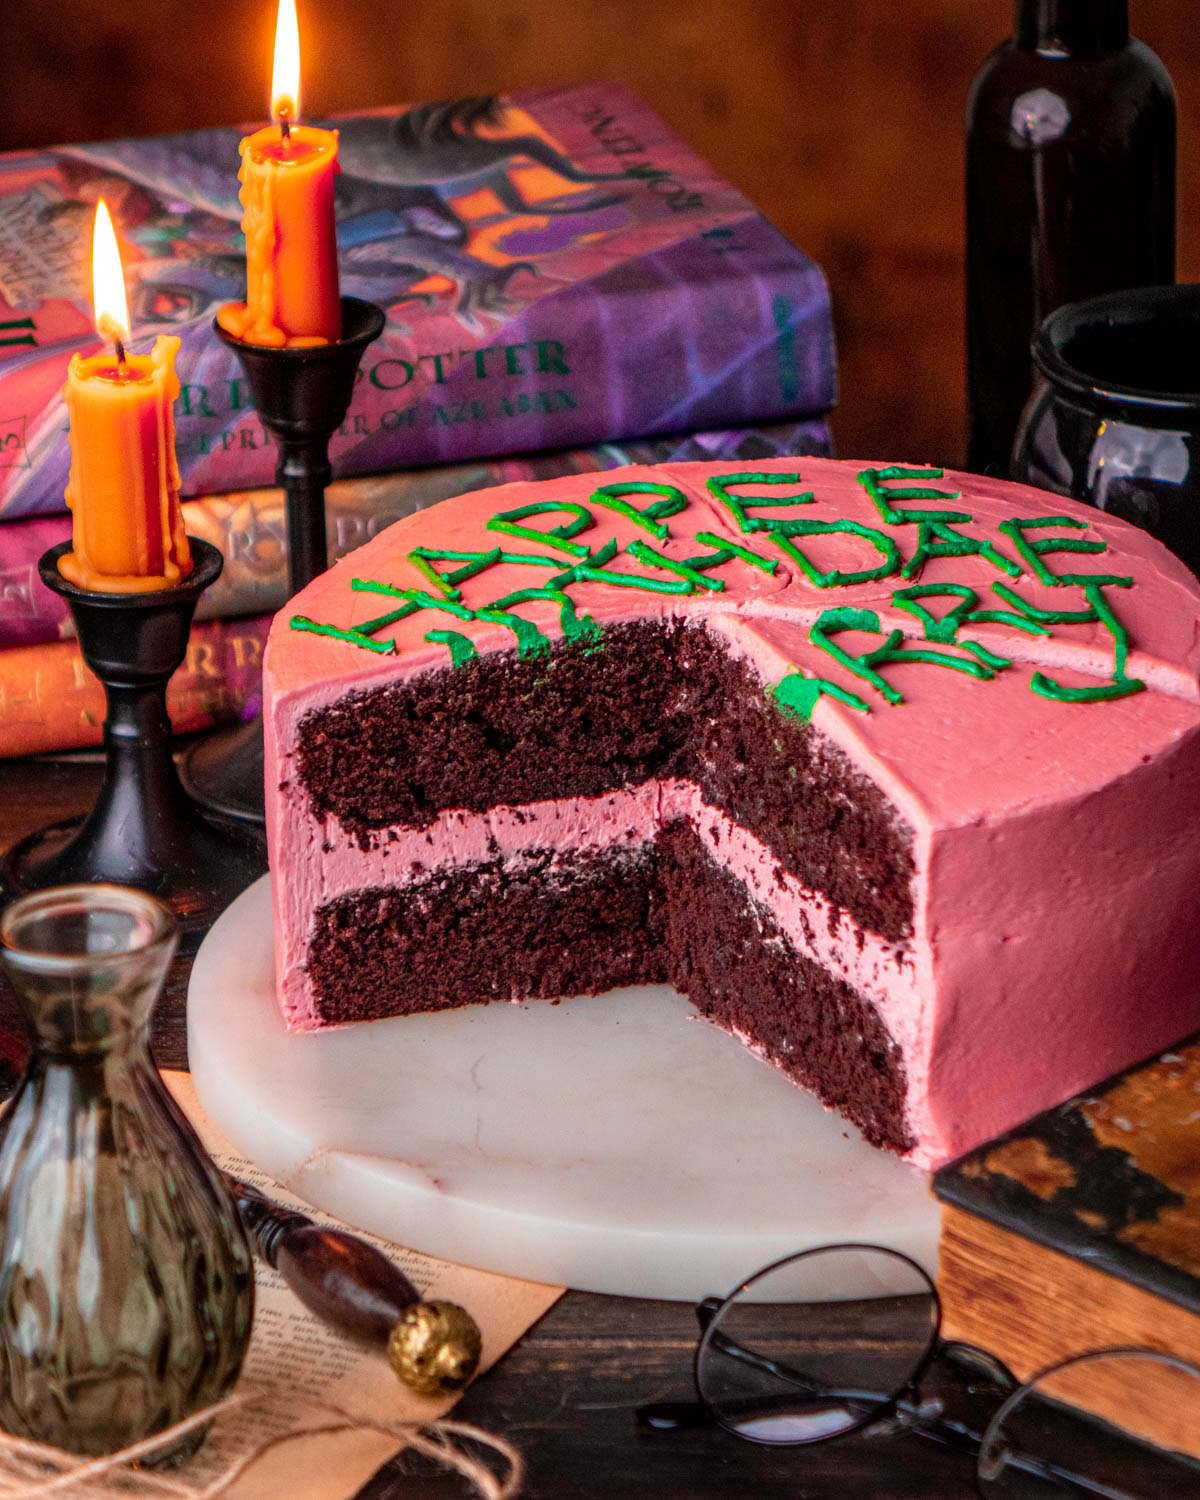 33 Best Harry Potter Cakes in 2022 : Burgundy Cake with Hogwarts Letter